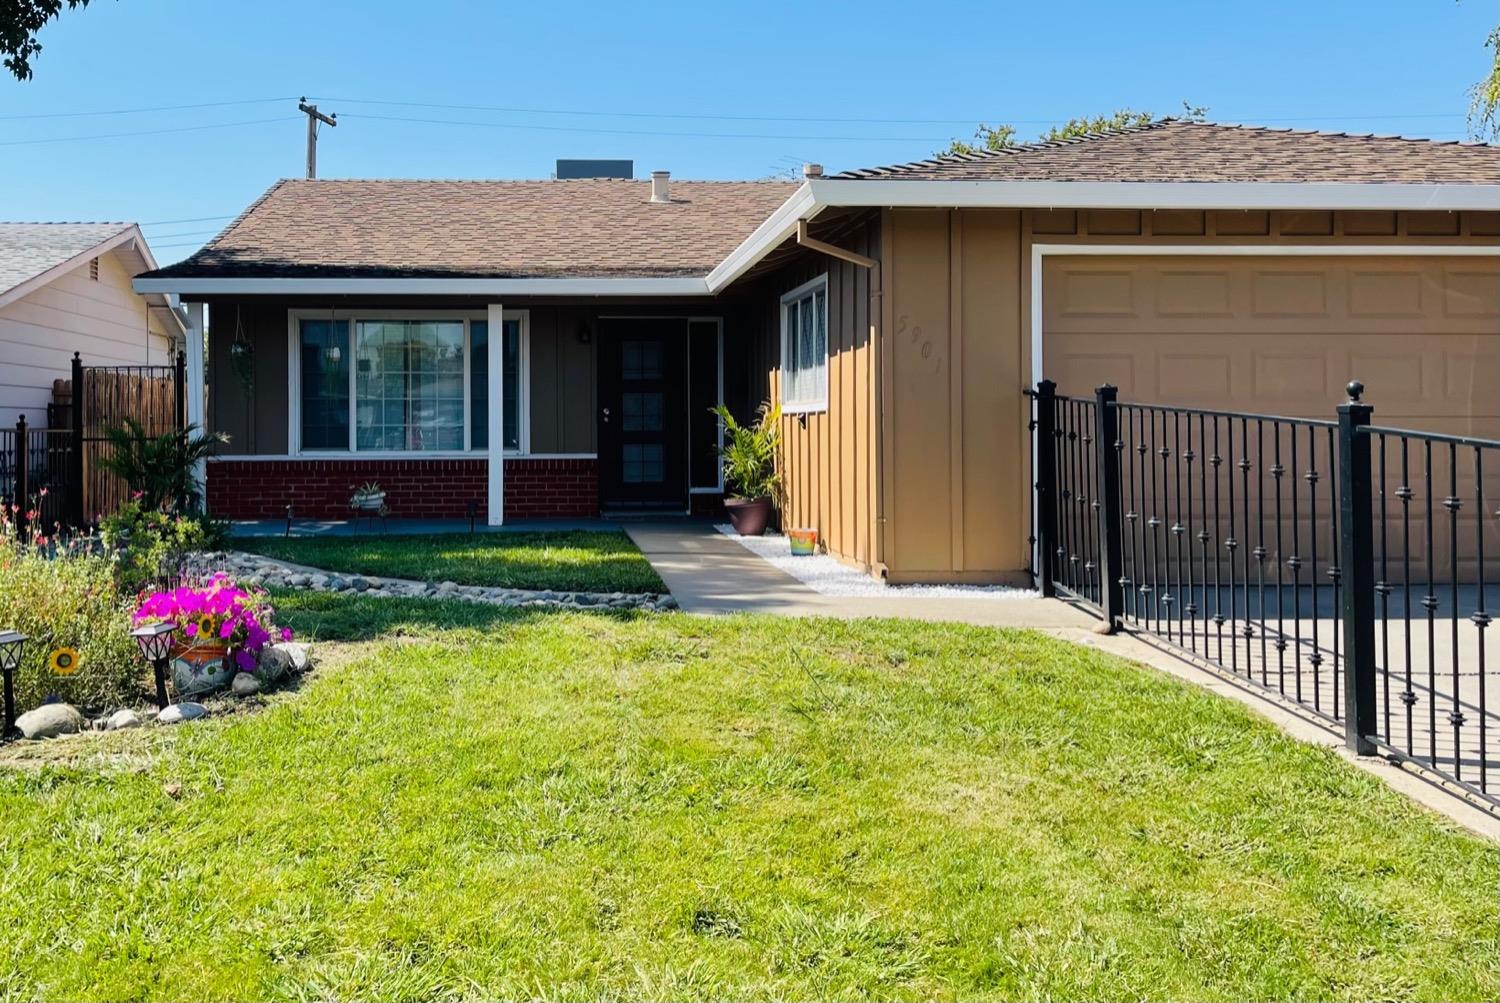 This charming 3 bedroom 2 bath home is within close proximity to schools, shopping and the freeway f